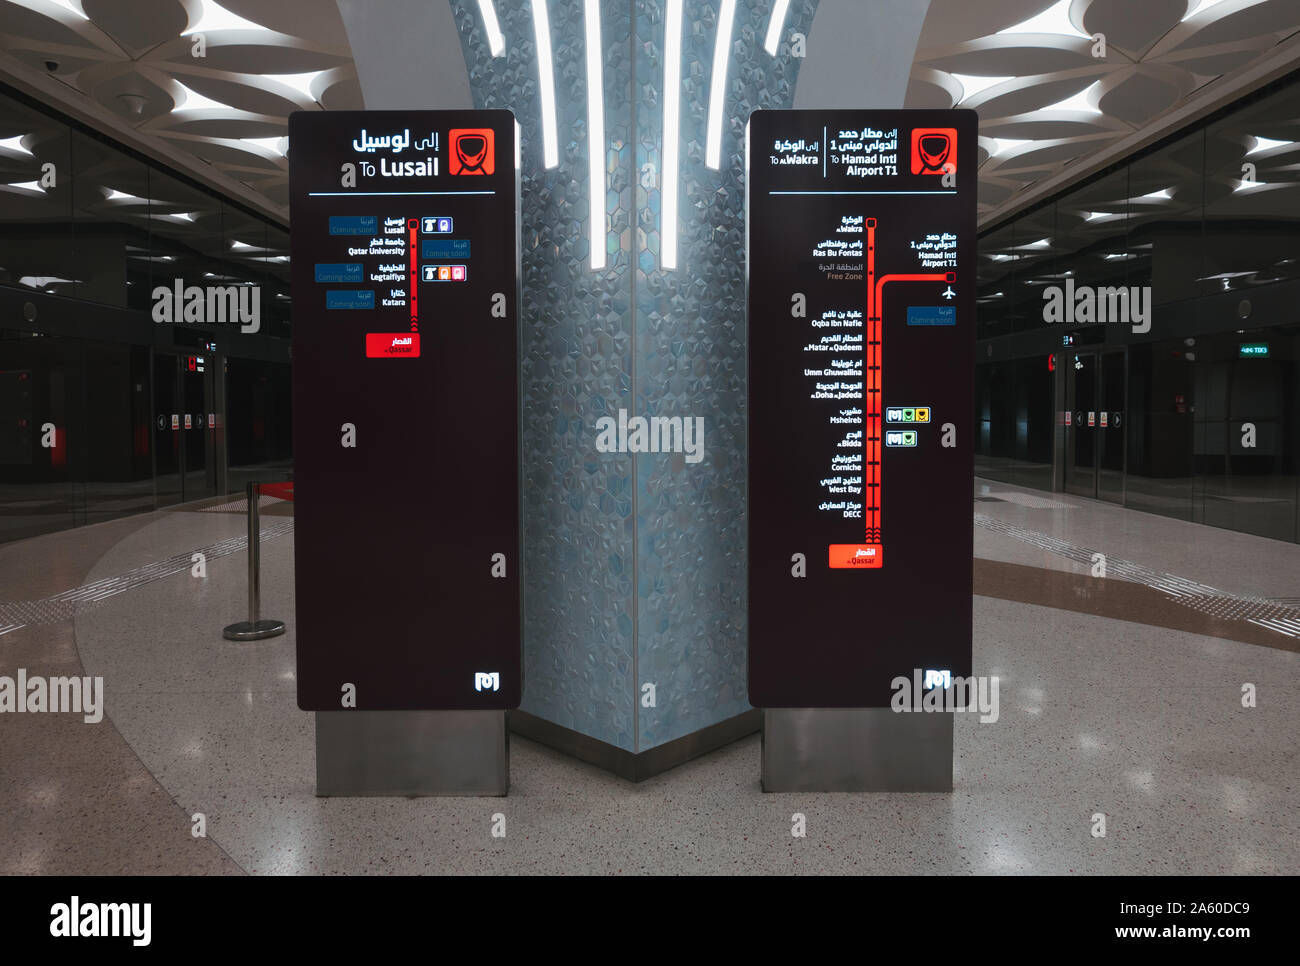 Signs show the route map of the train from Lusail to Al Wakra and Hamad  Airport on the platform of the Doha Metro, Qatar Stock Photo - Alamy